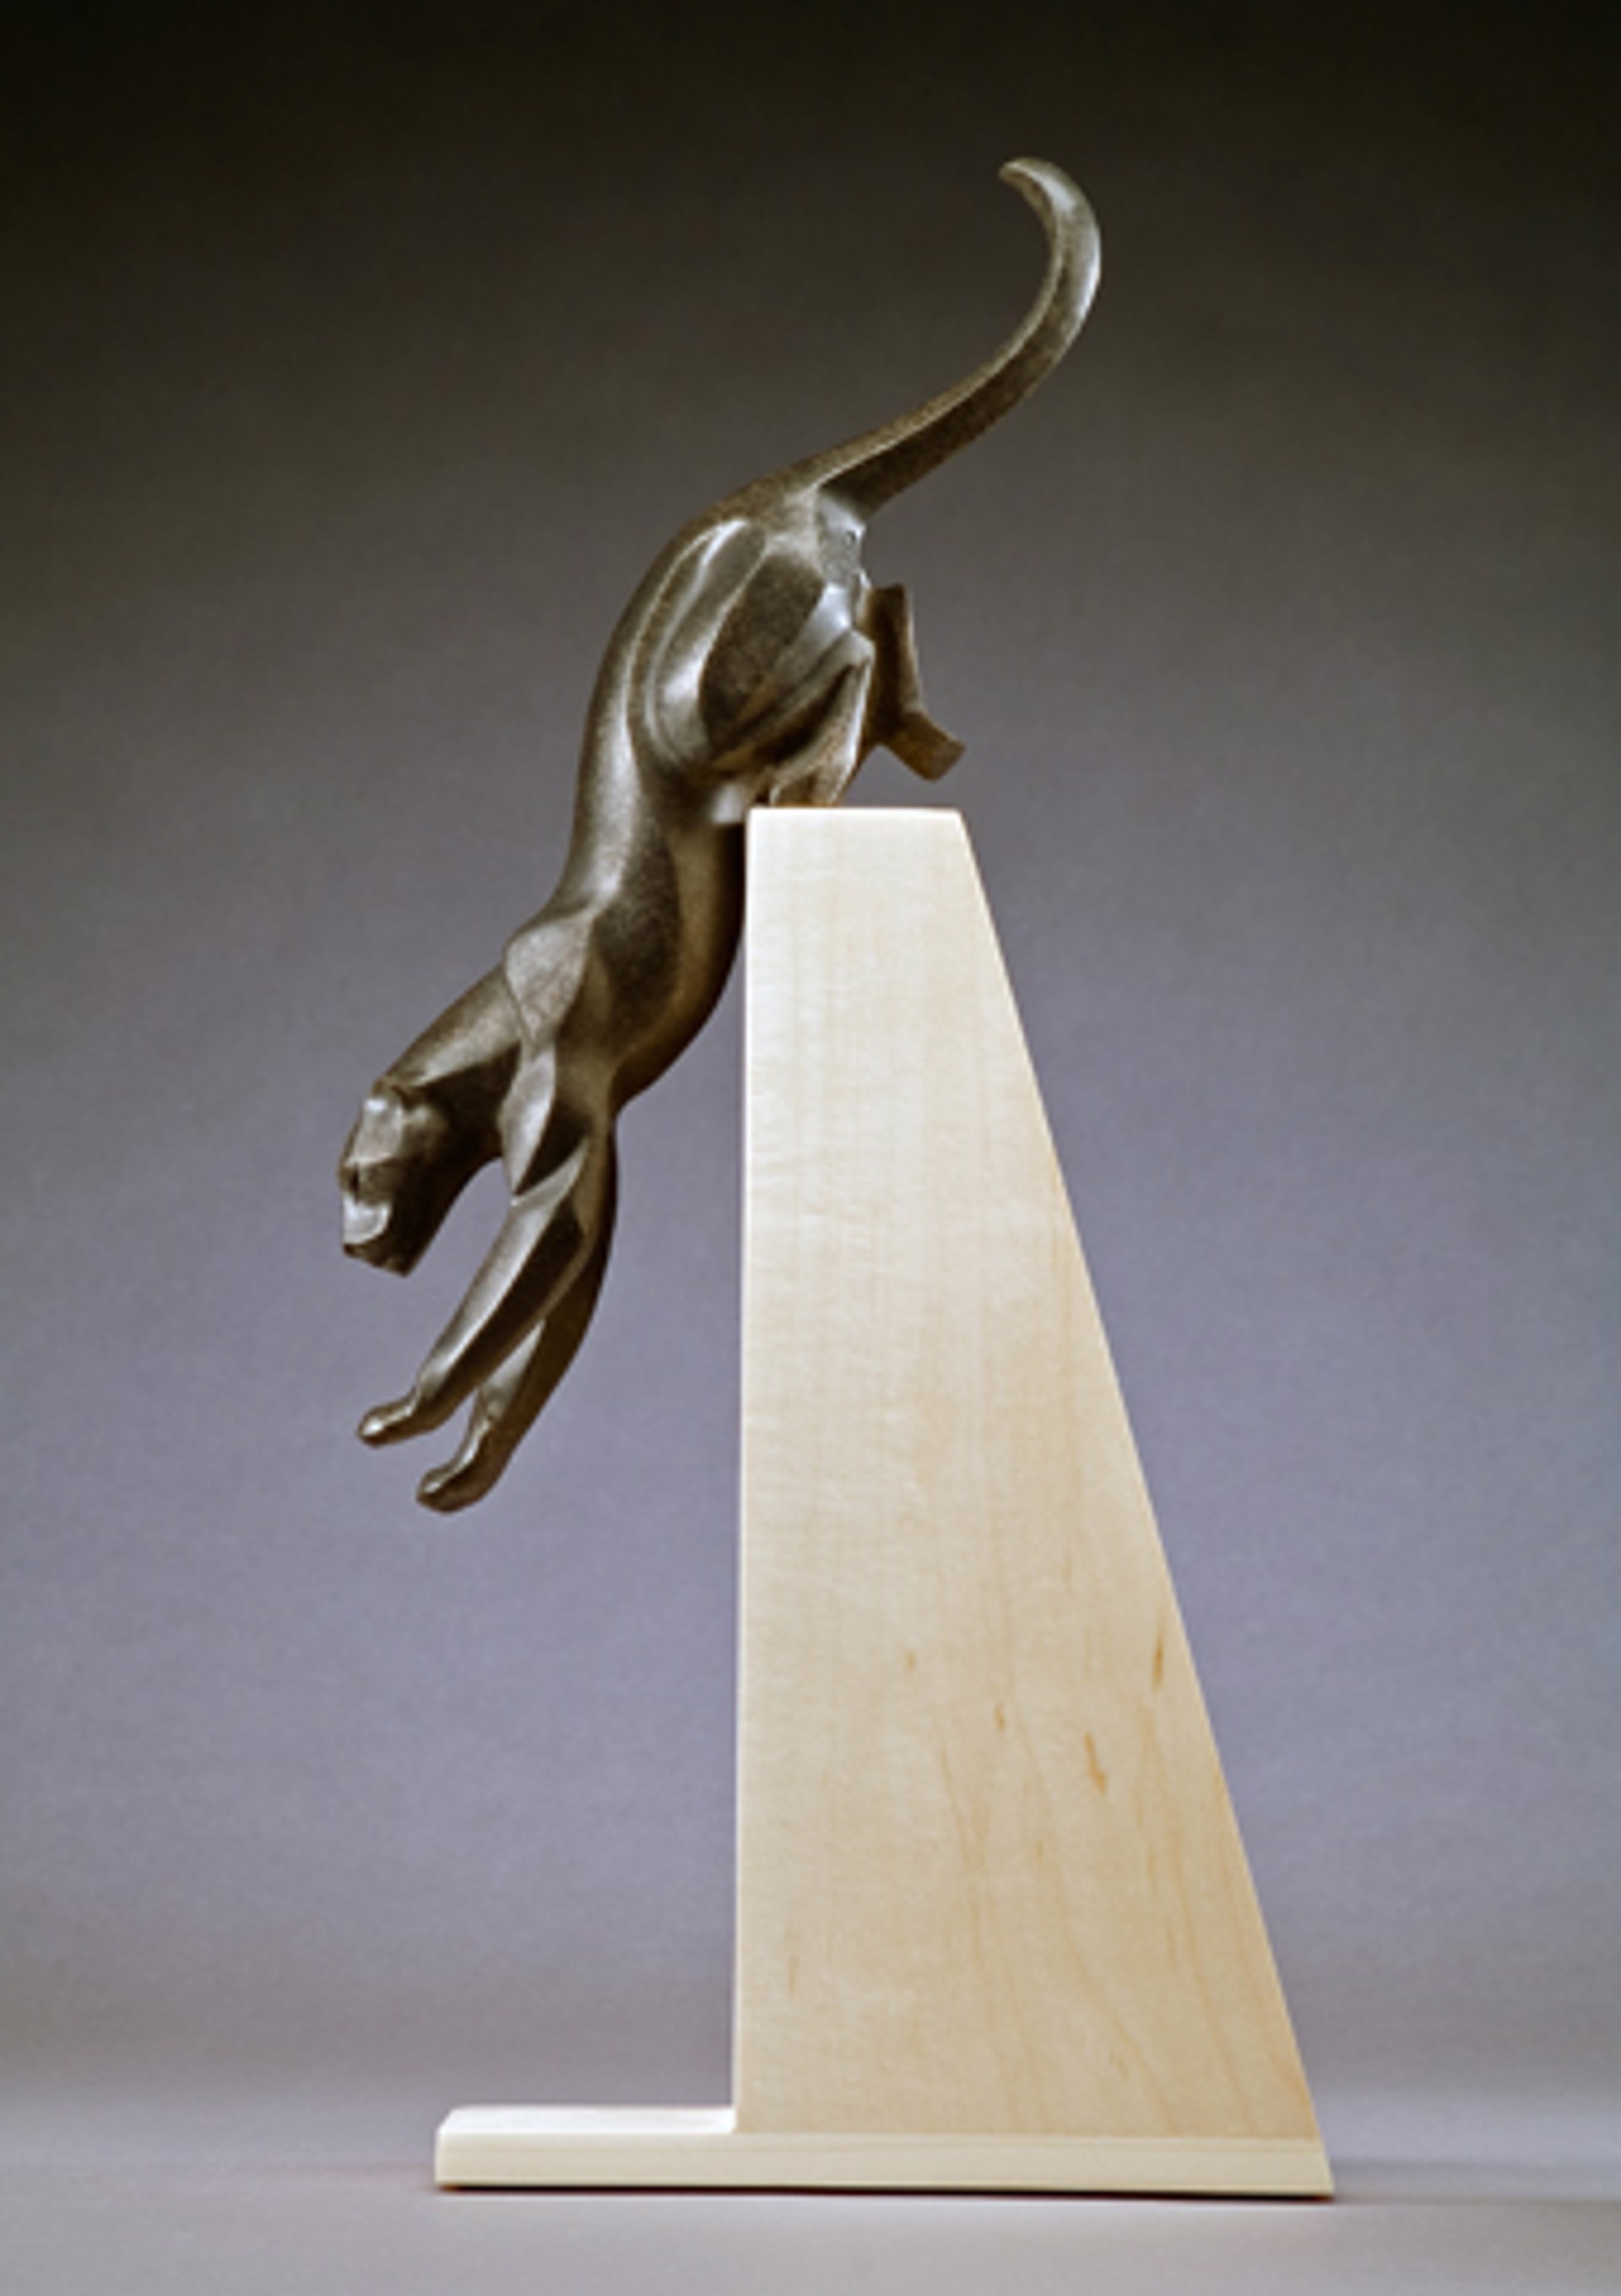 The Leap Maquette by Rosetta